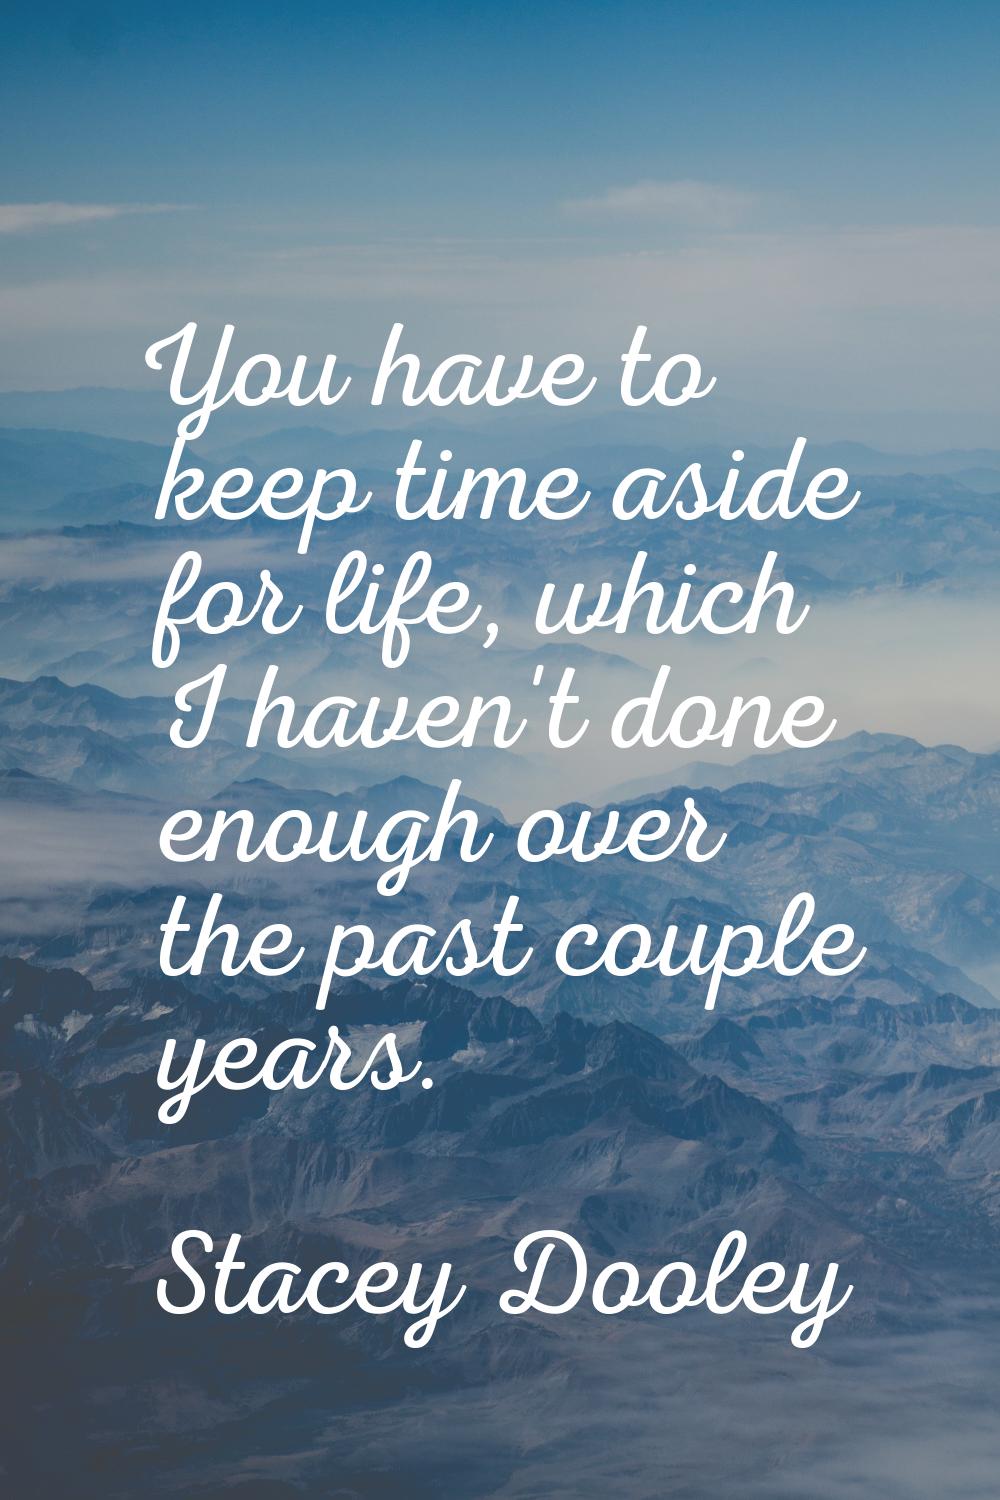 You have to keep time aside for life, which I haven't done enough over the past couple years.